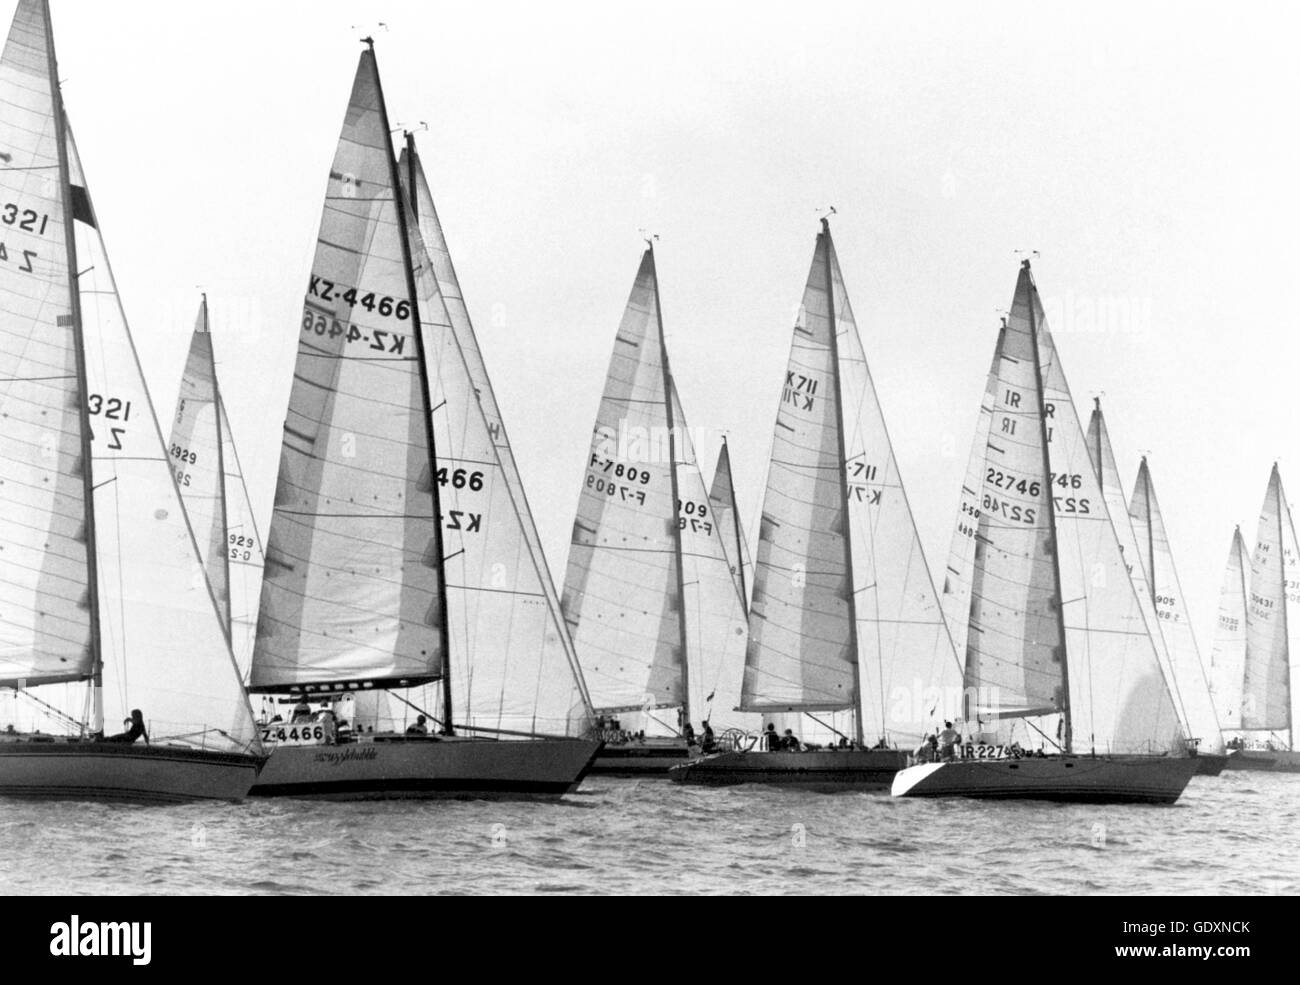 AJAXNETPHOTO. 29TH JULY, 1981. COWES, ENGLAND. - ADMIRAL'S CUP 1ST RACE - 16 NATIONS ARE CONTESTING THIS YEAR'S ADMIRAL'S CUP PRIZE. HERE SOME OF THE 48 STARTERS DRIFT OFF INTO A MISTY SOLENT AND AN EVENTUALLY SHORTENED COURSE. SURPRISE WINNERS WERE CAIMAN II, ALMAGORES AND PINTA.  PHOTO:JONATHAN EASTLAND/AJAX  REF:YAR FLEET ADC 2907 1981 Stock Photo